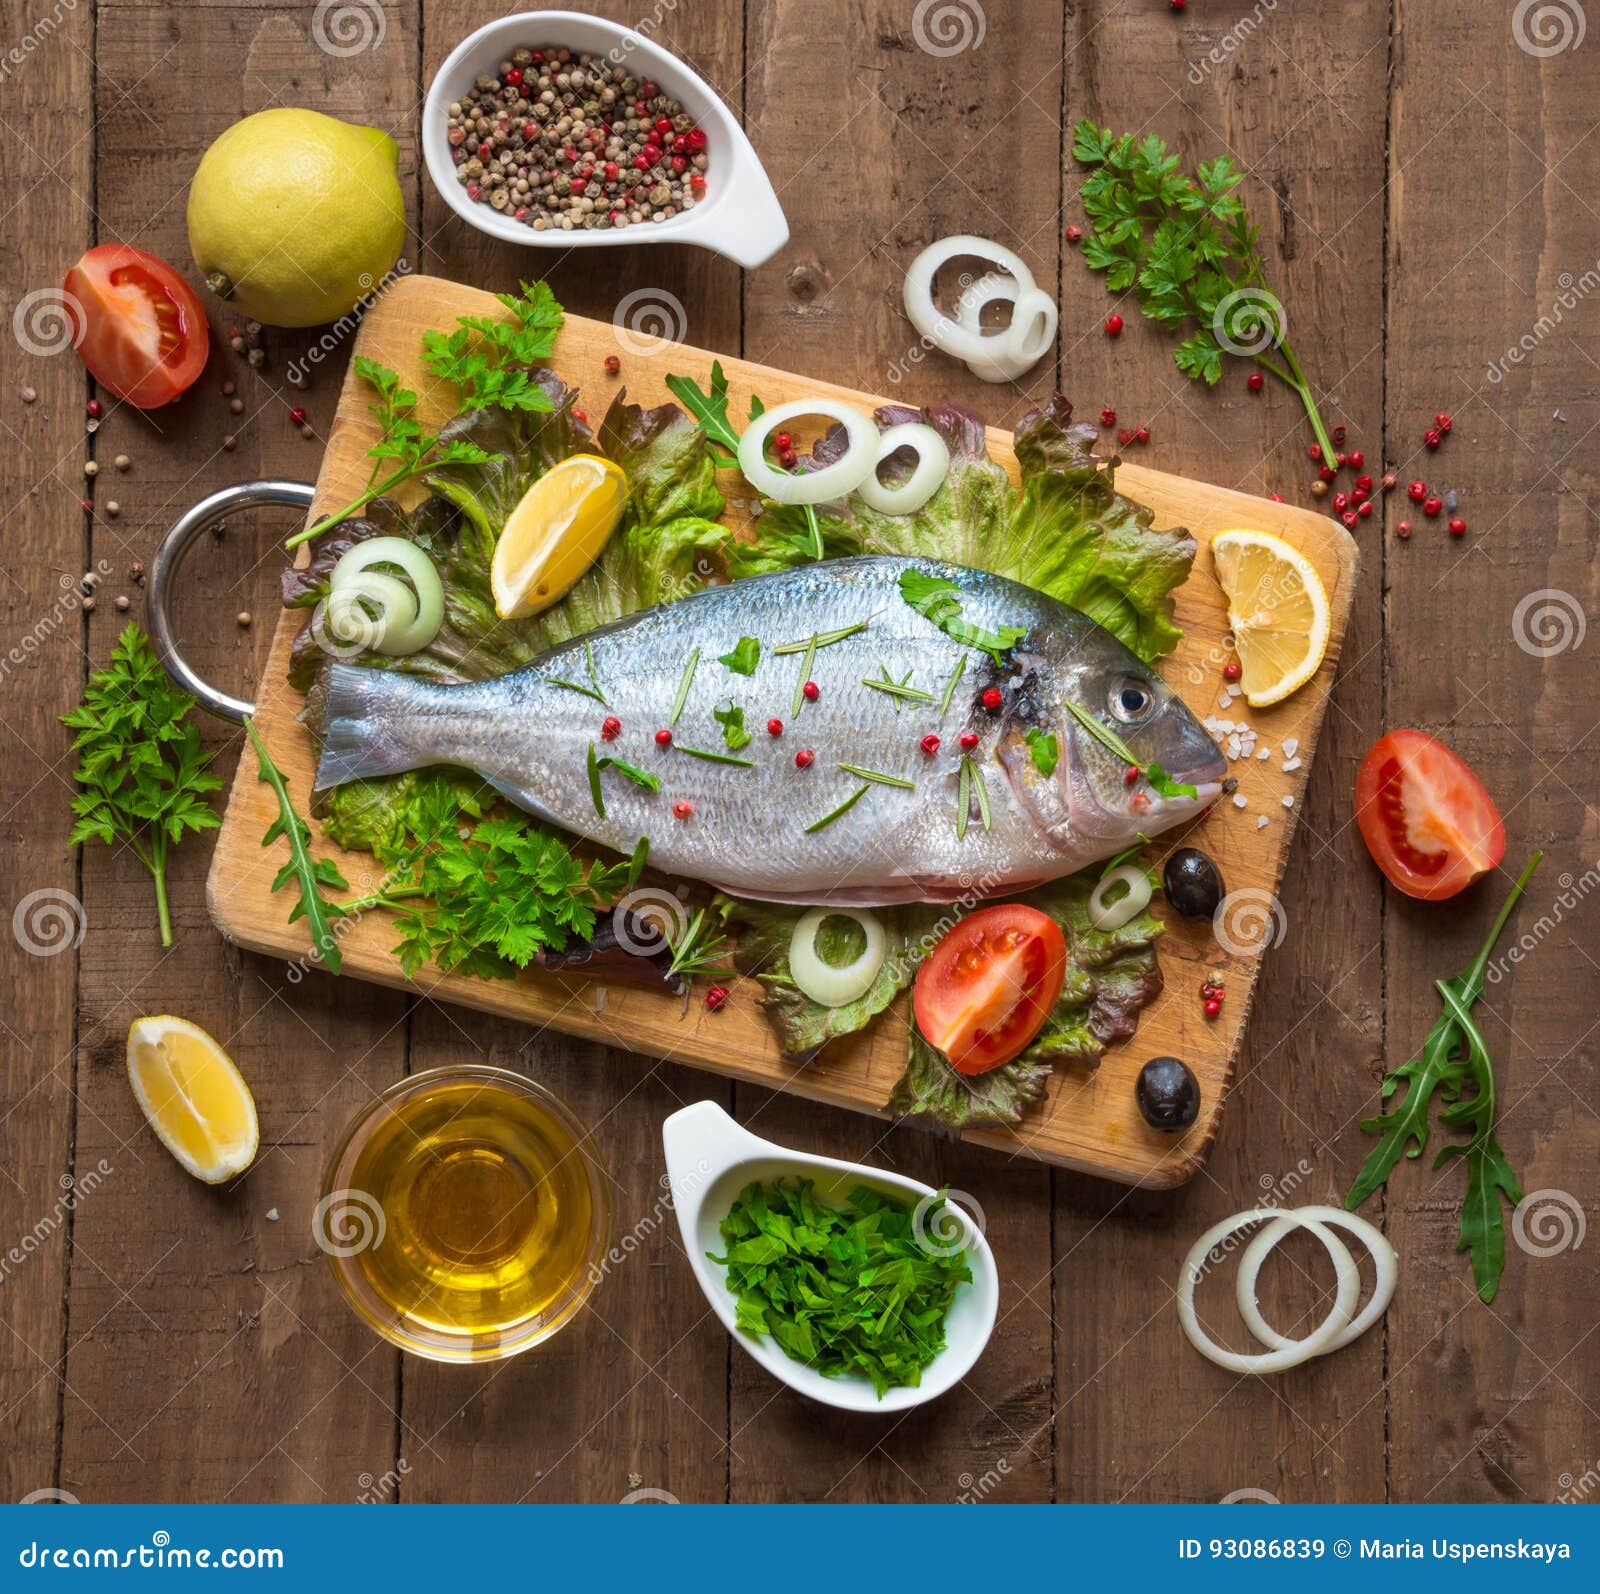 Raw fish ready for cooking stock image. Image of lemon - 93086839